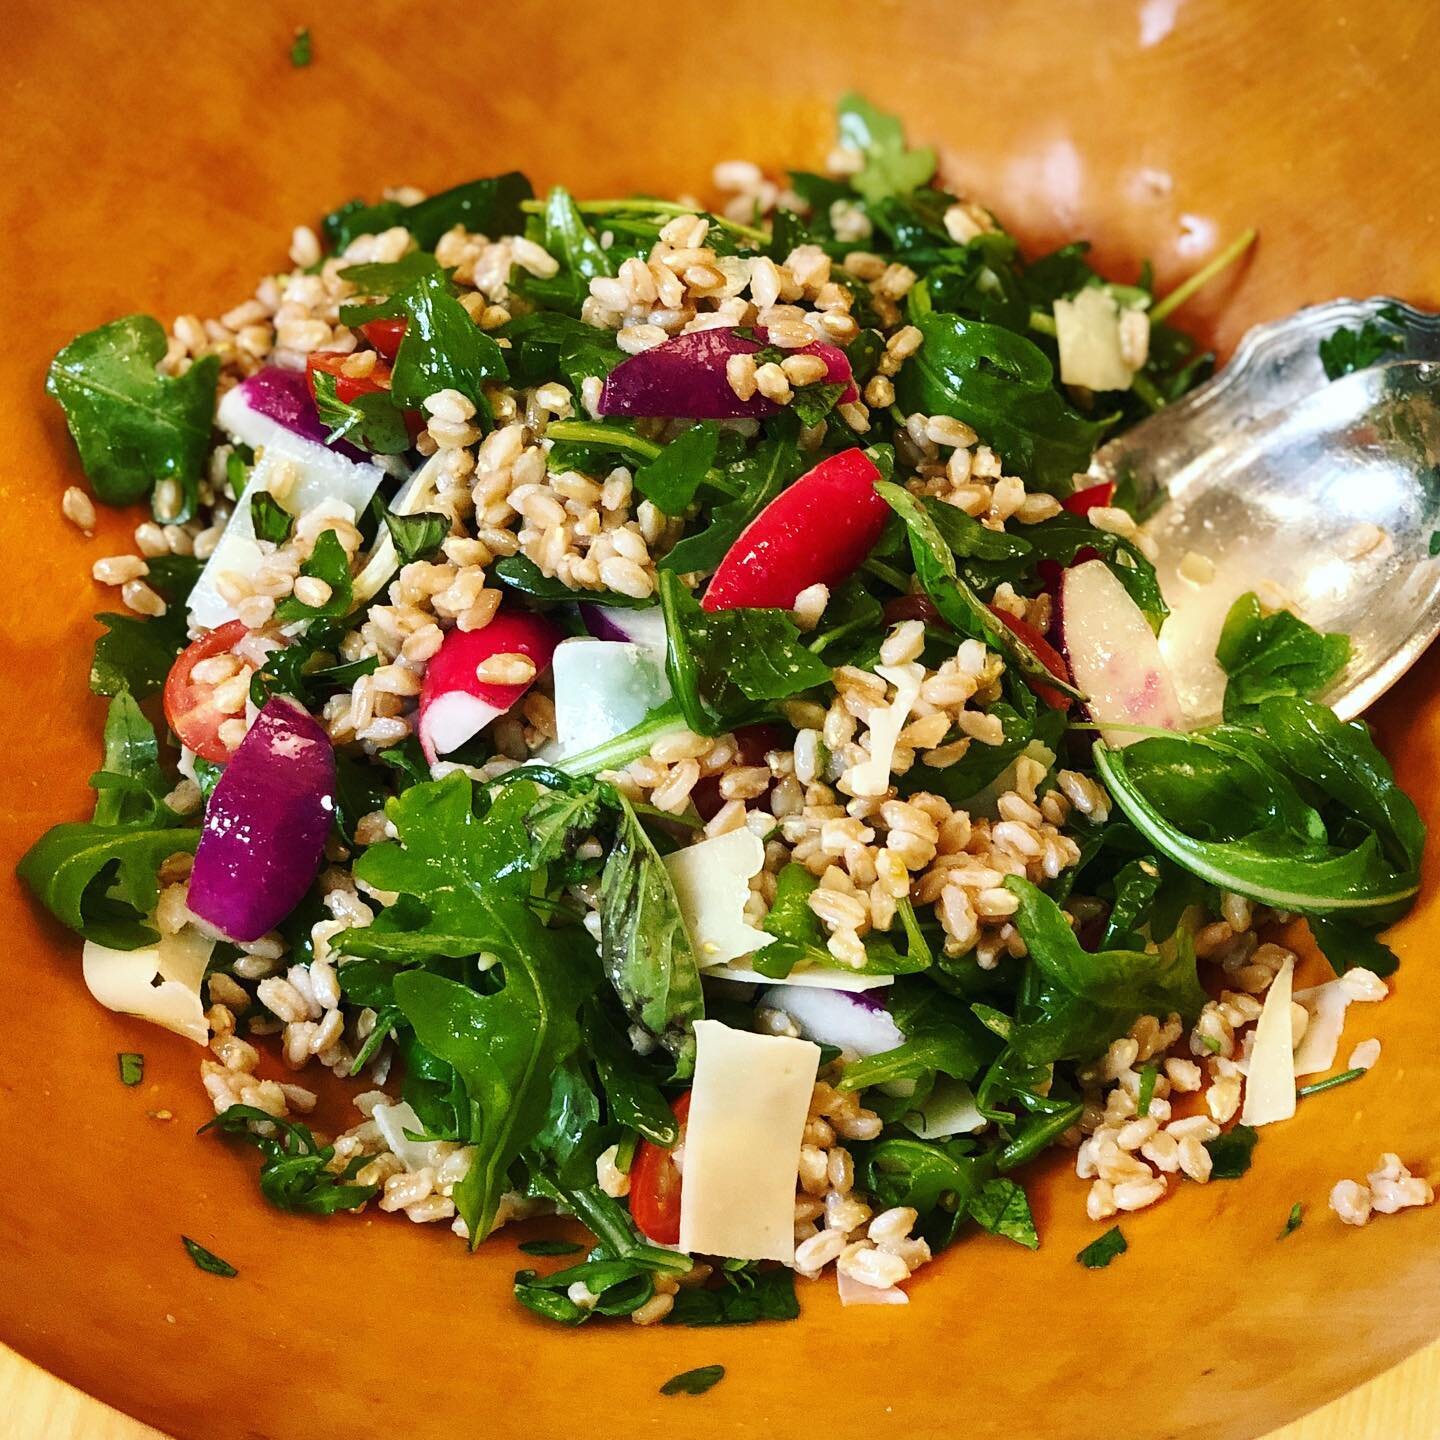 Far out farro. Who loves farro? It&rsquo;s a fabulous nutty grain that shines in salads, soups and sides. I love to add it to salads for healthy fiber, taste and texture. This Mediterranean salad is a summer favorite with fresh crunchy radishes, ripe